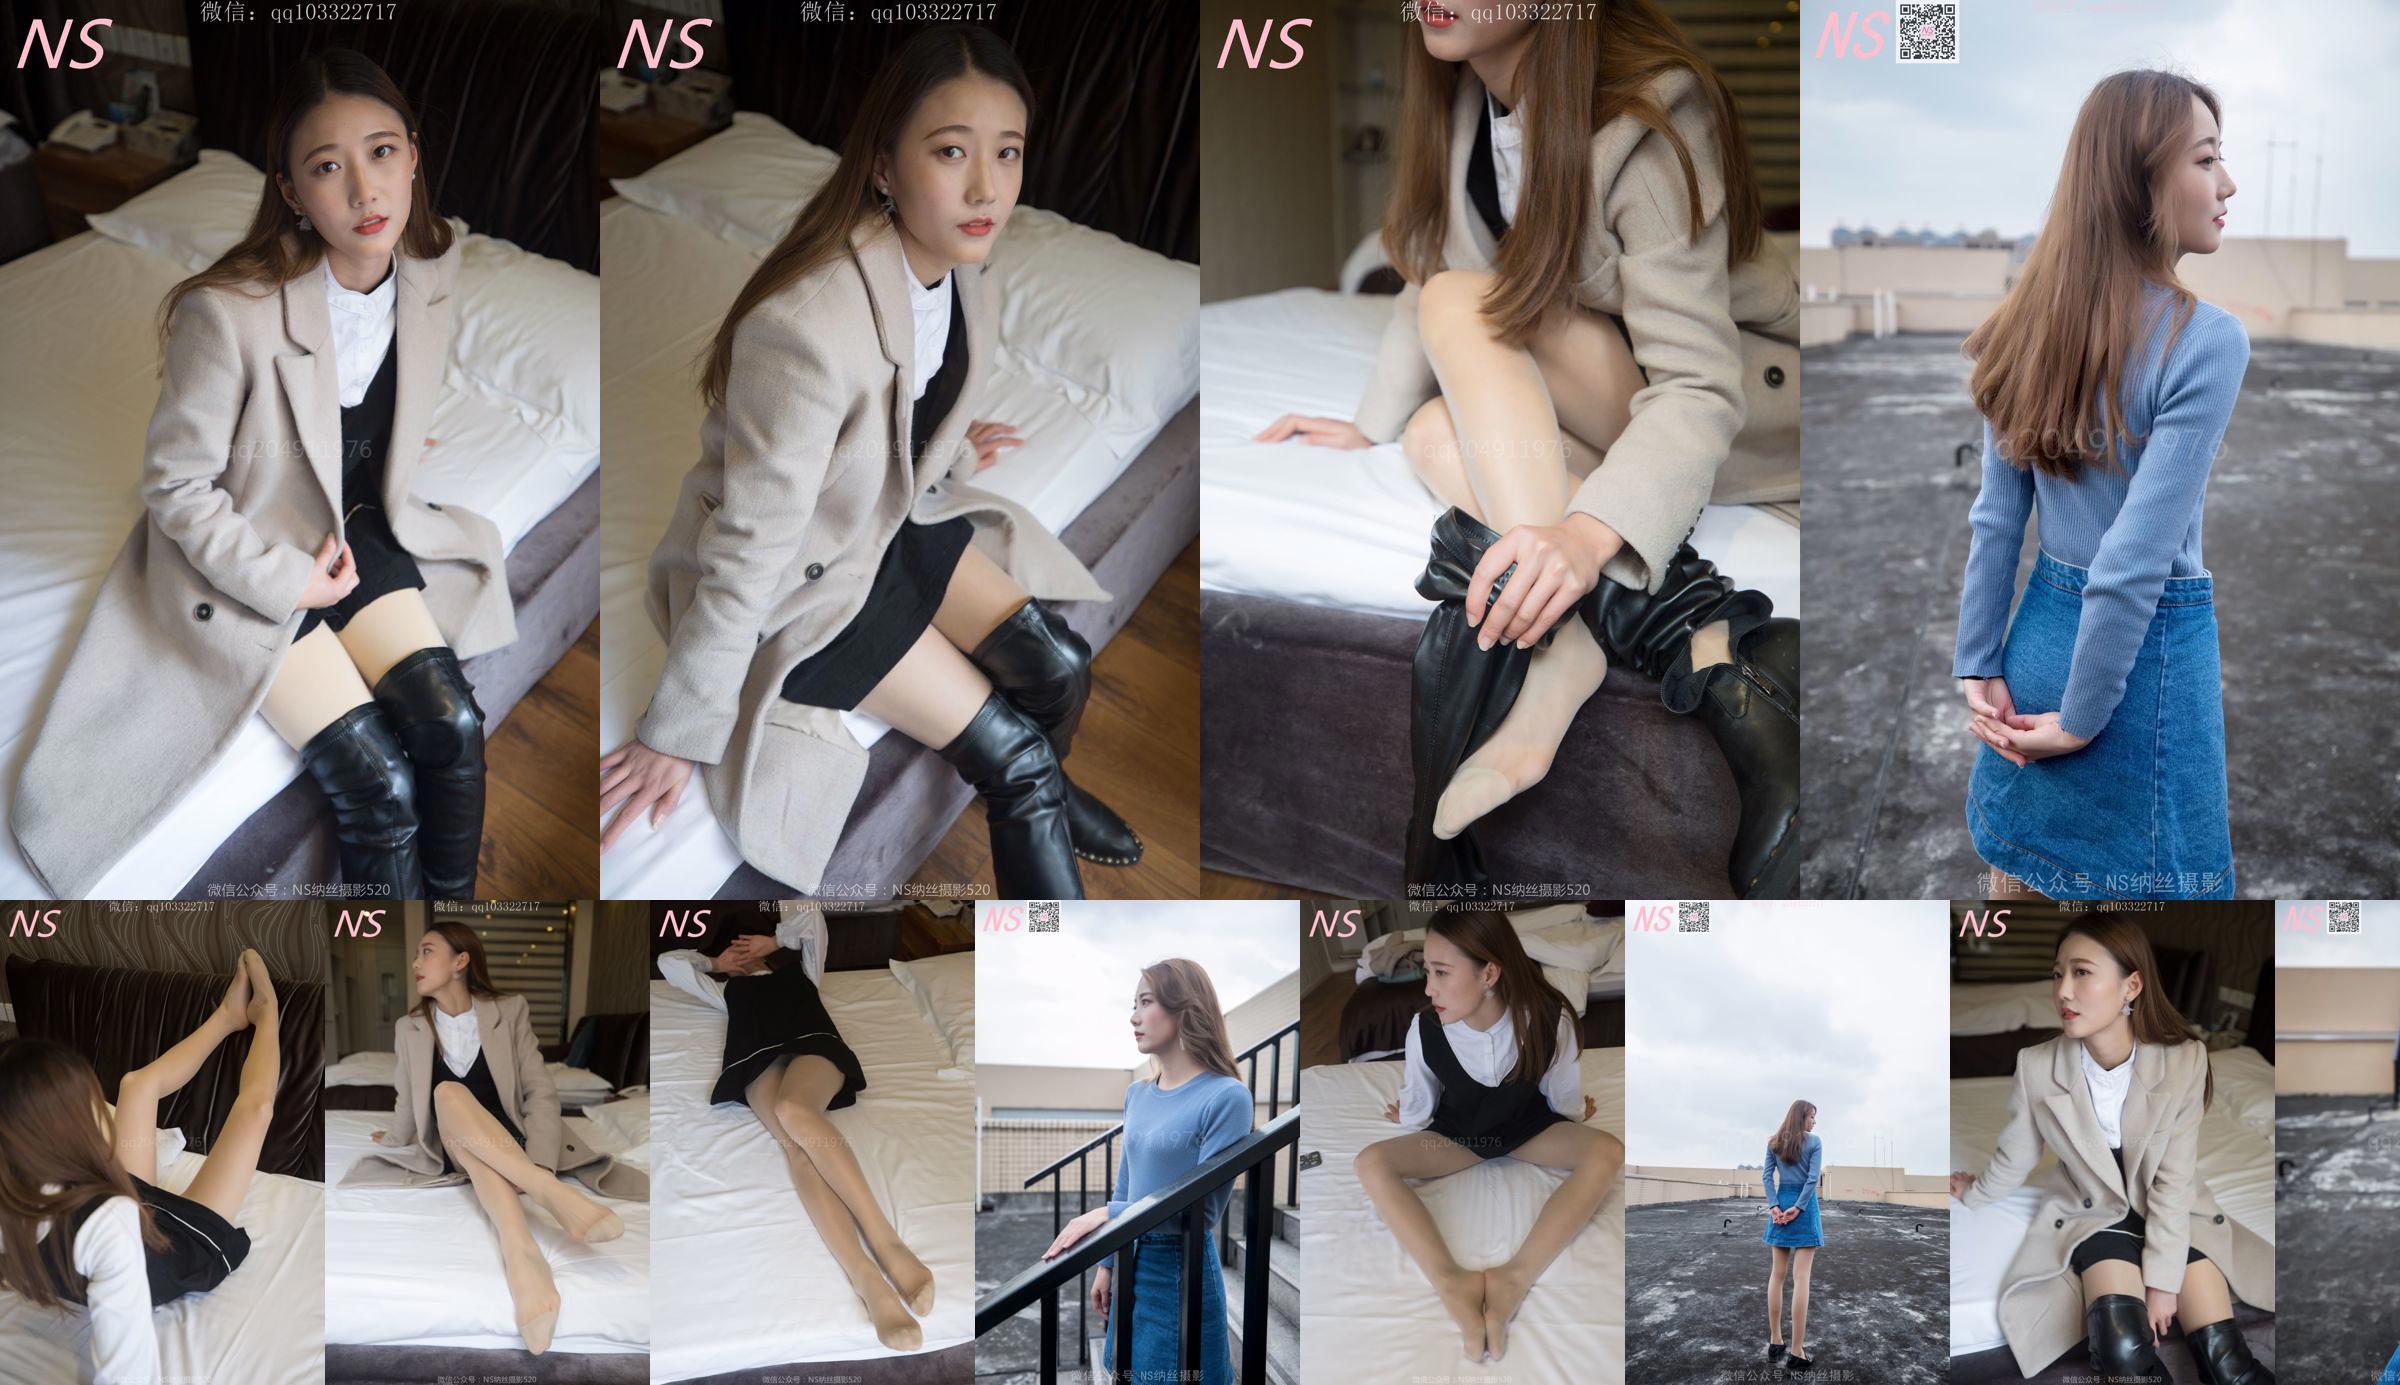 Shu Yi "The Encounter With The Boots Off The Stockings" [Nass Photography] No.038afb หน้า 2